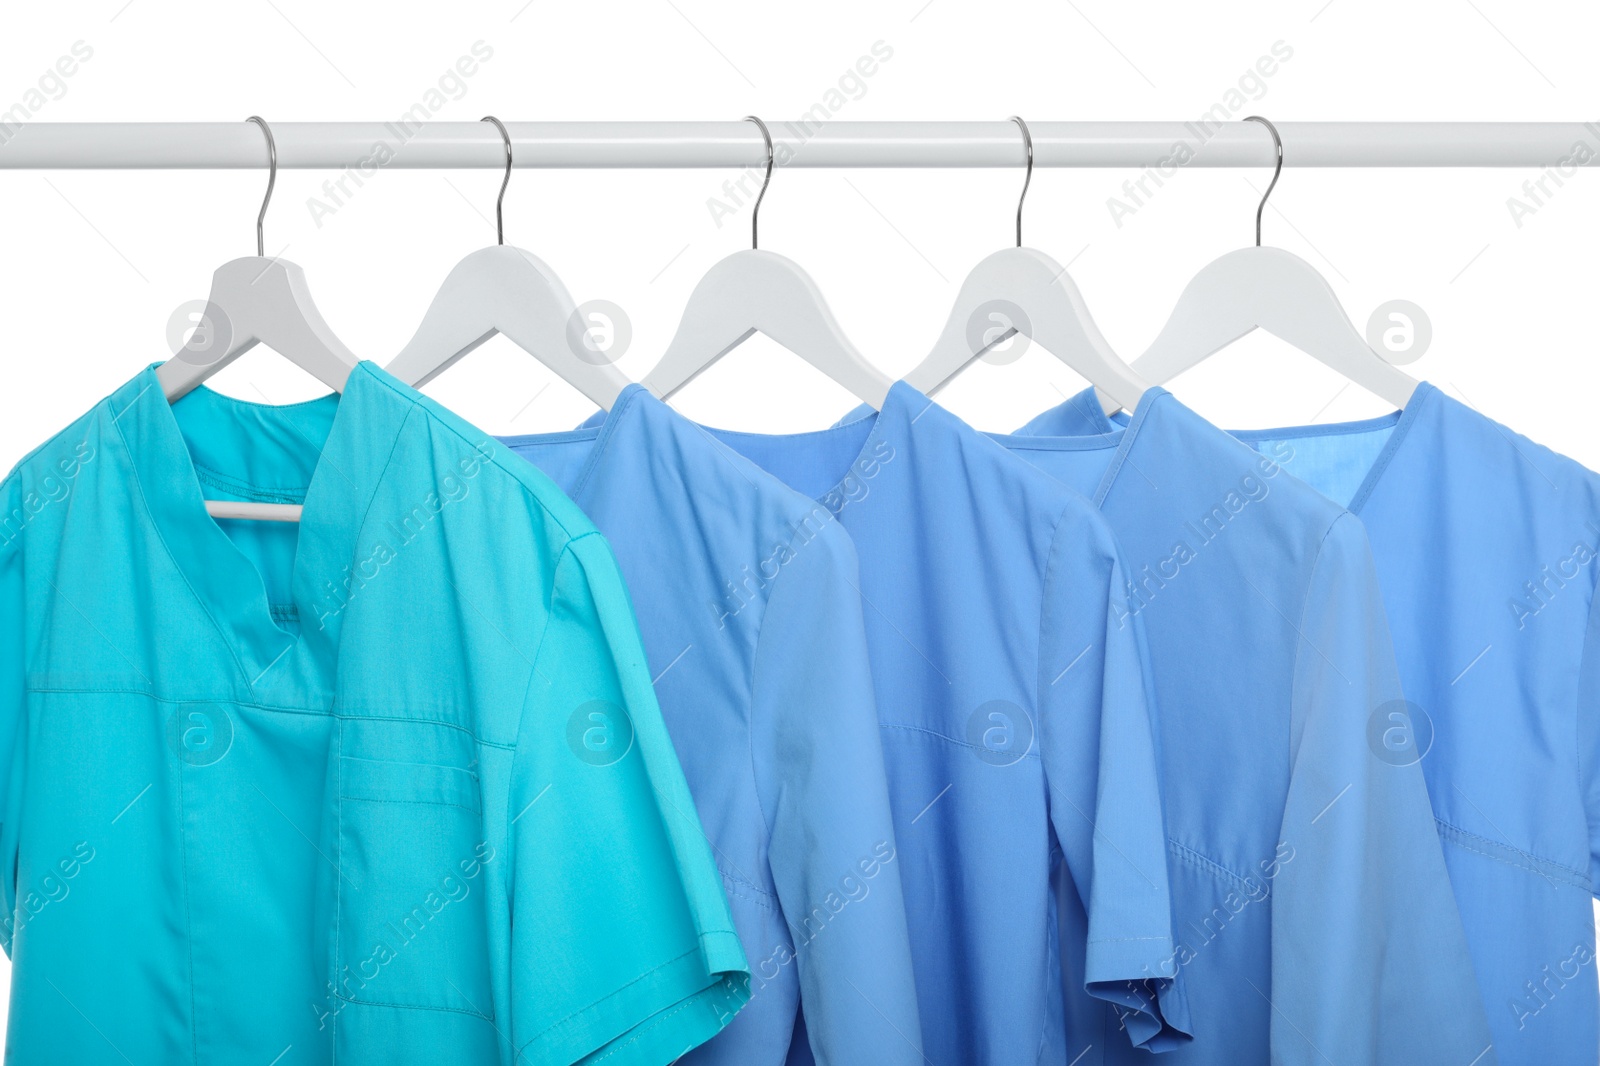 Photo of Turquoise and light blue medical uniforms on rack against white background